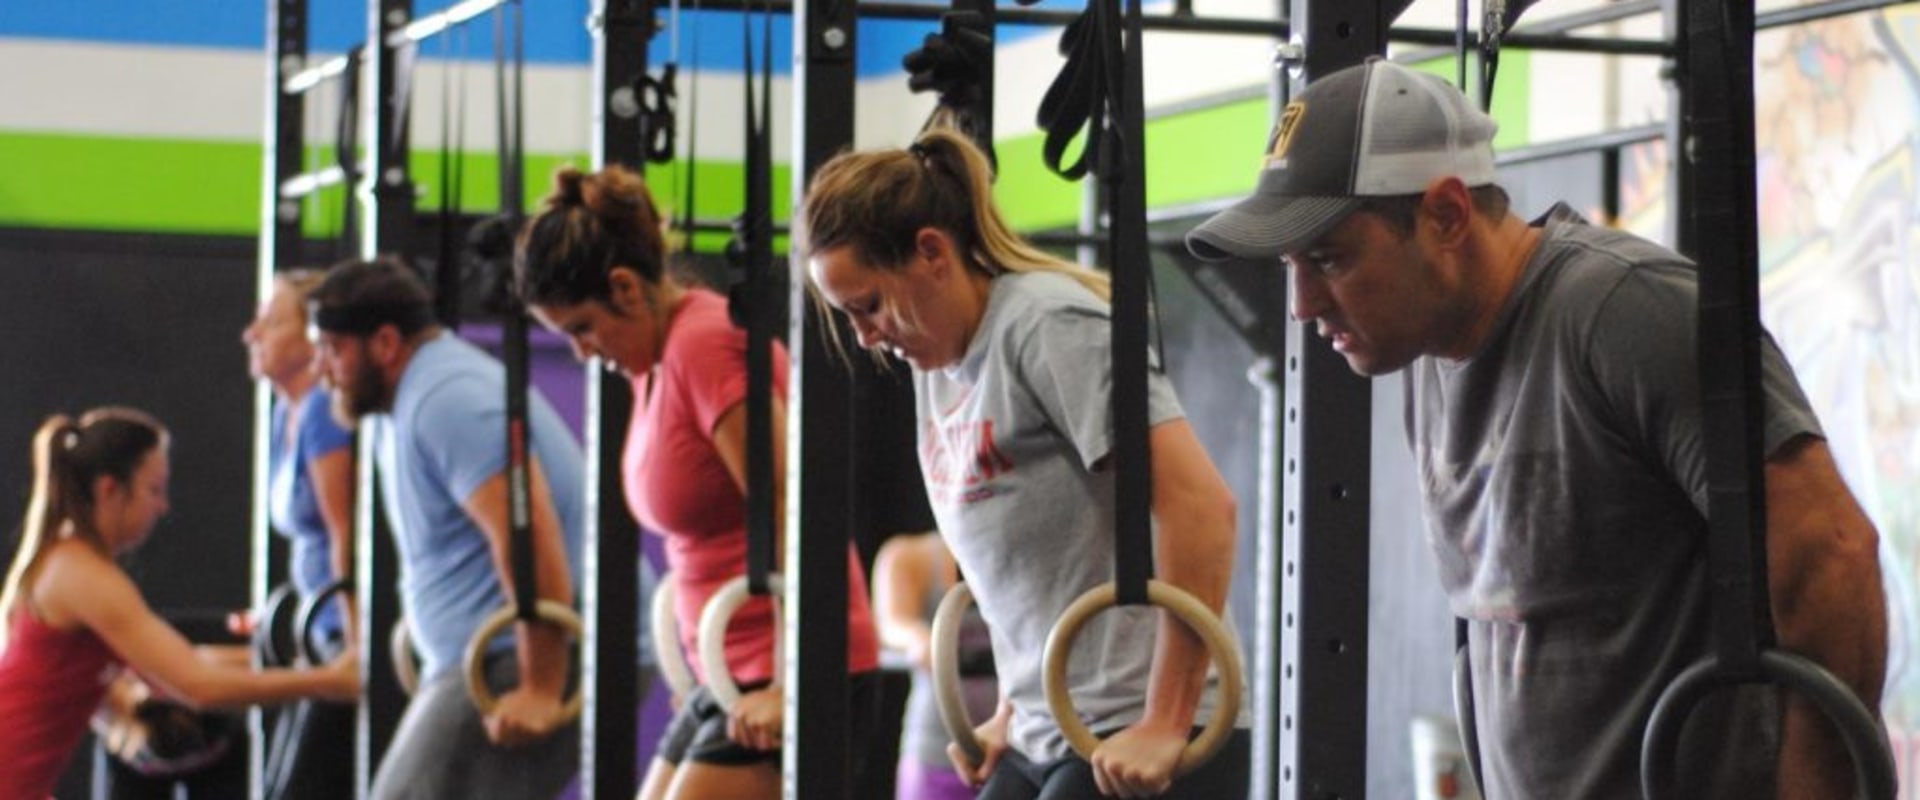 Everything You Need to Know About Online Crossfit Classes and Programs